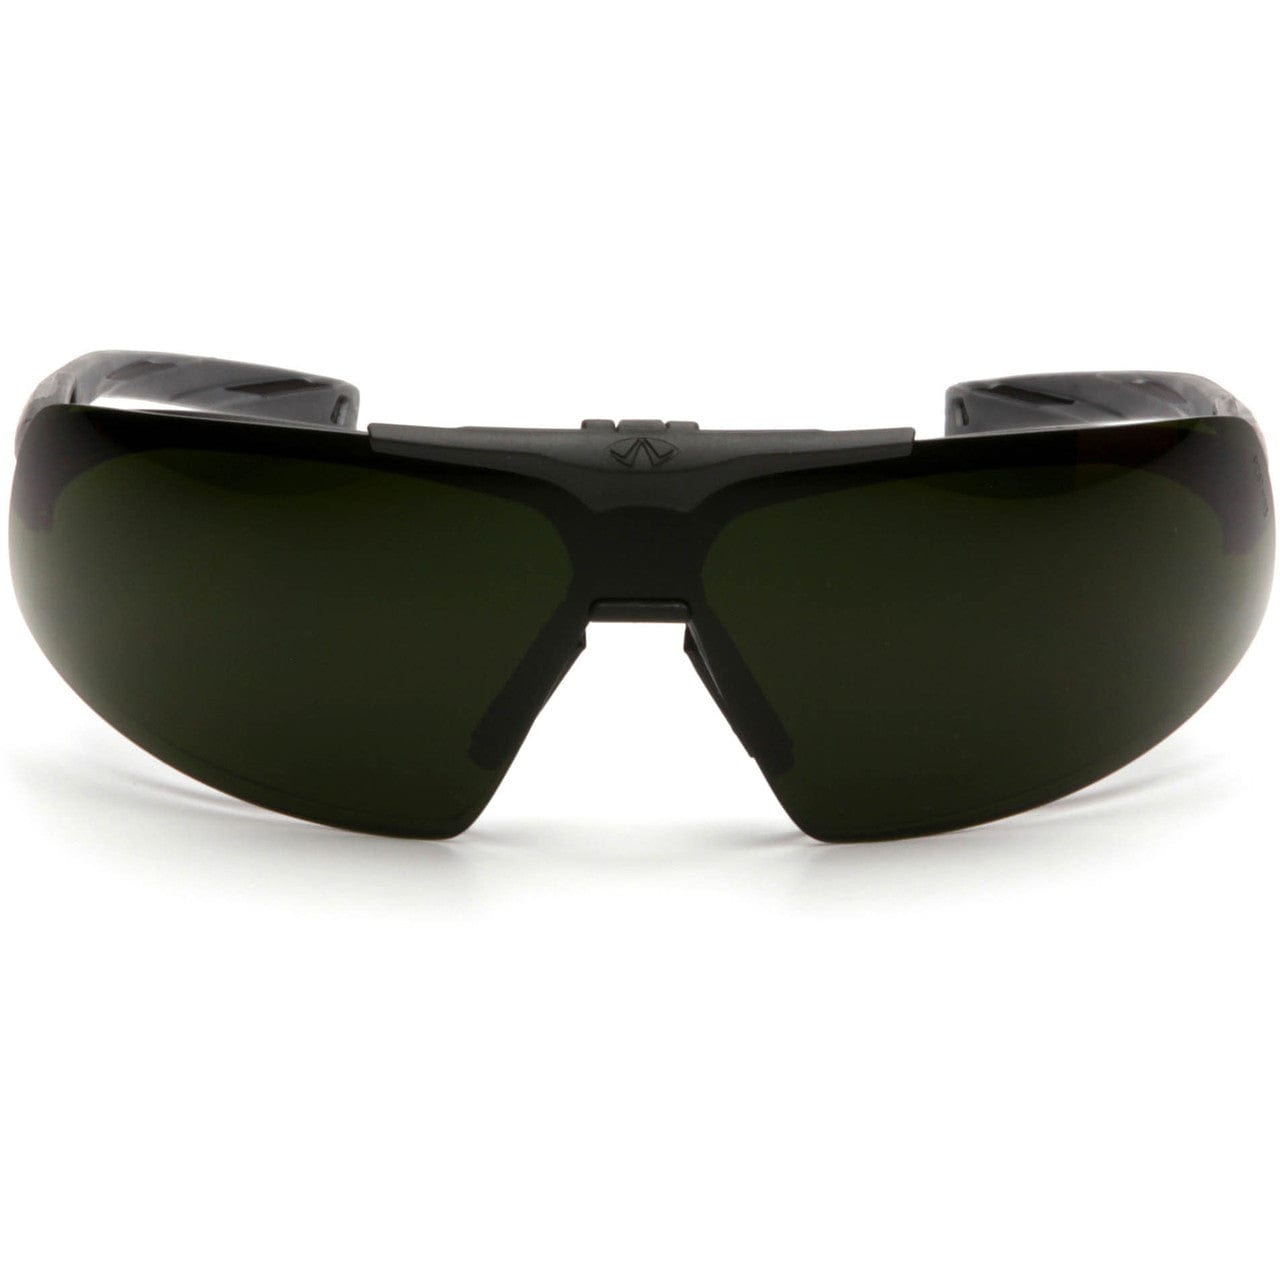 Pyramex Onix Plus Safety Glasses with Clear Anti-Fog Lens and Shade 5 Flip Lens Front View